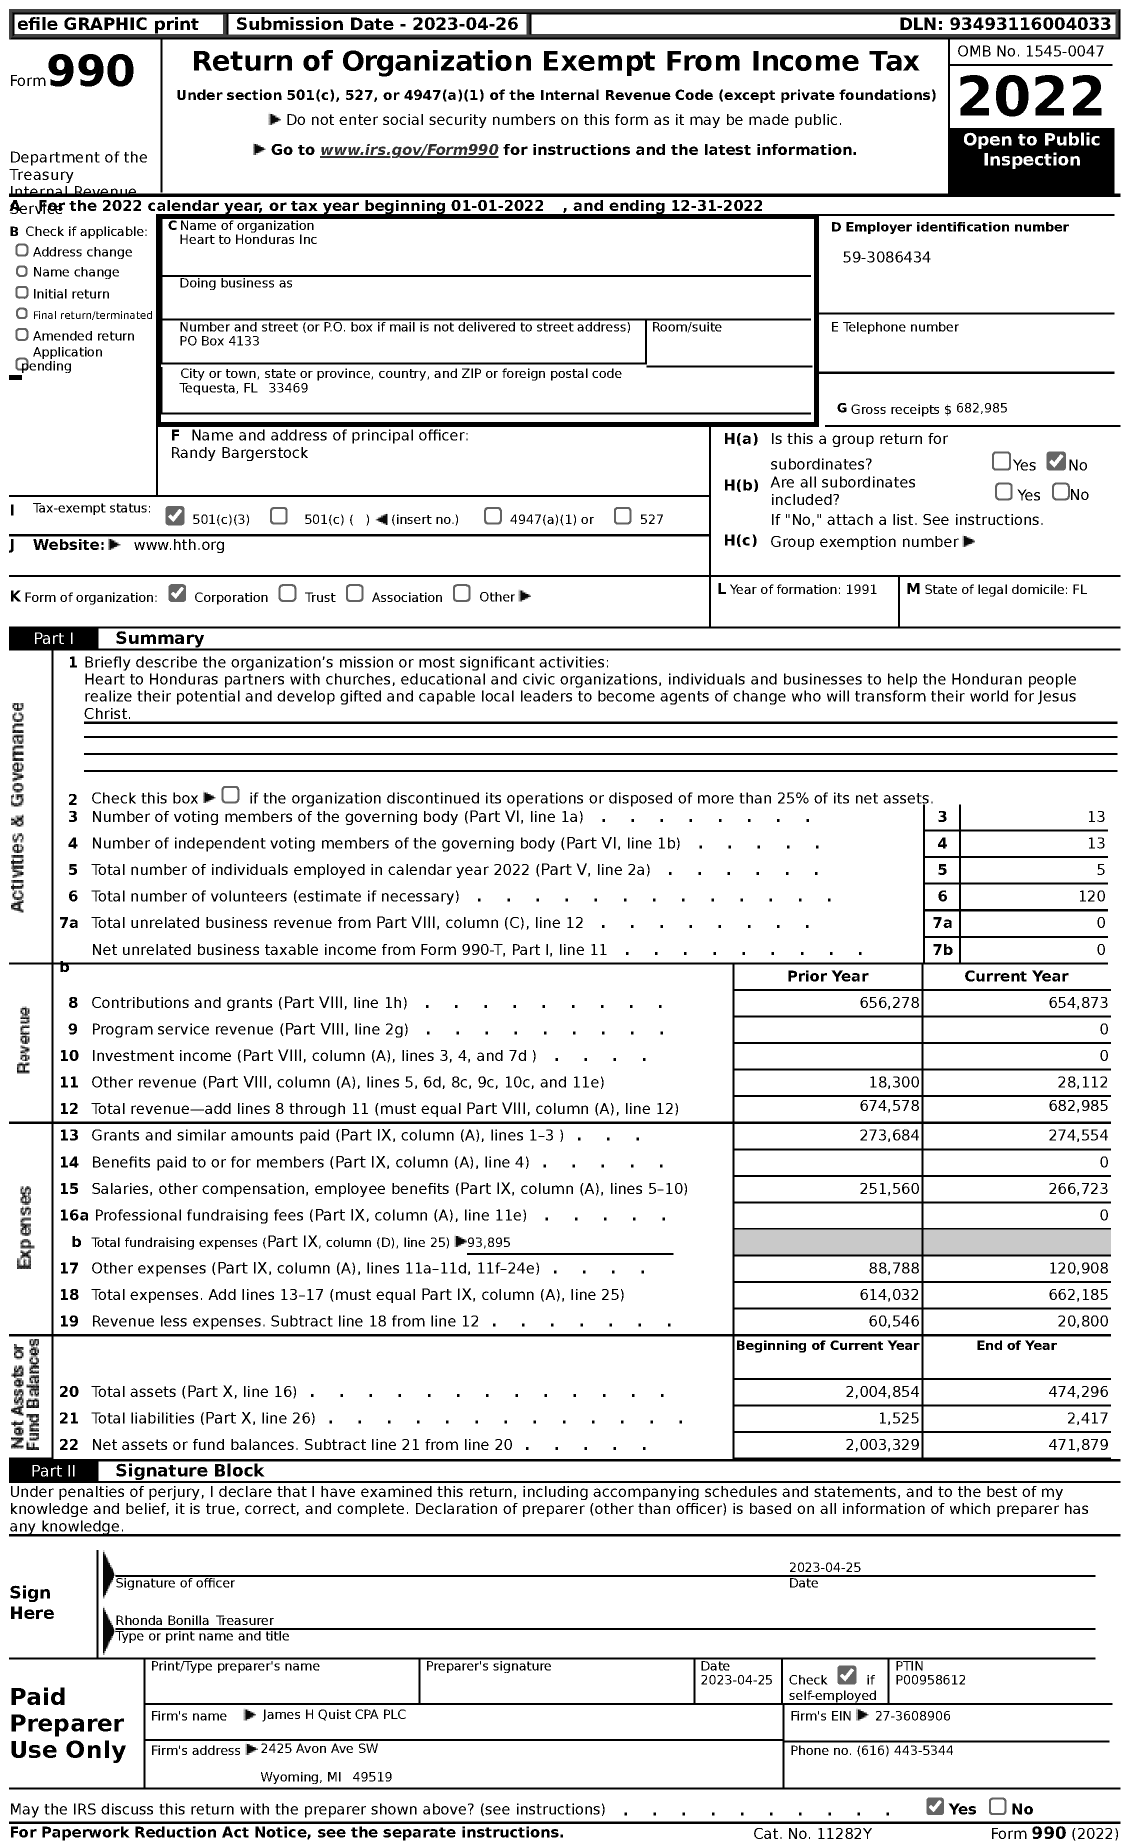 Image of first page of 2022 Form 990 for Heart to Honduras (HTH)